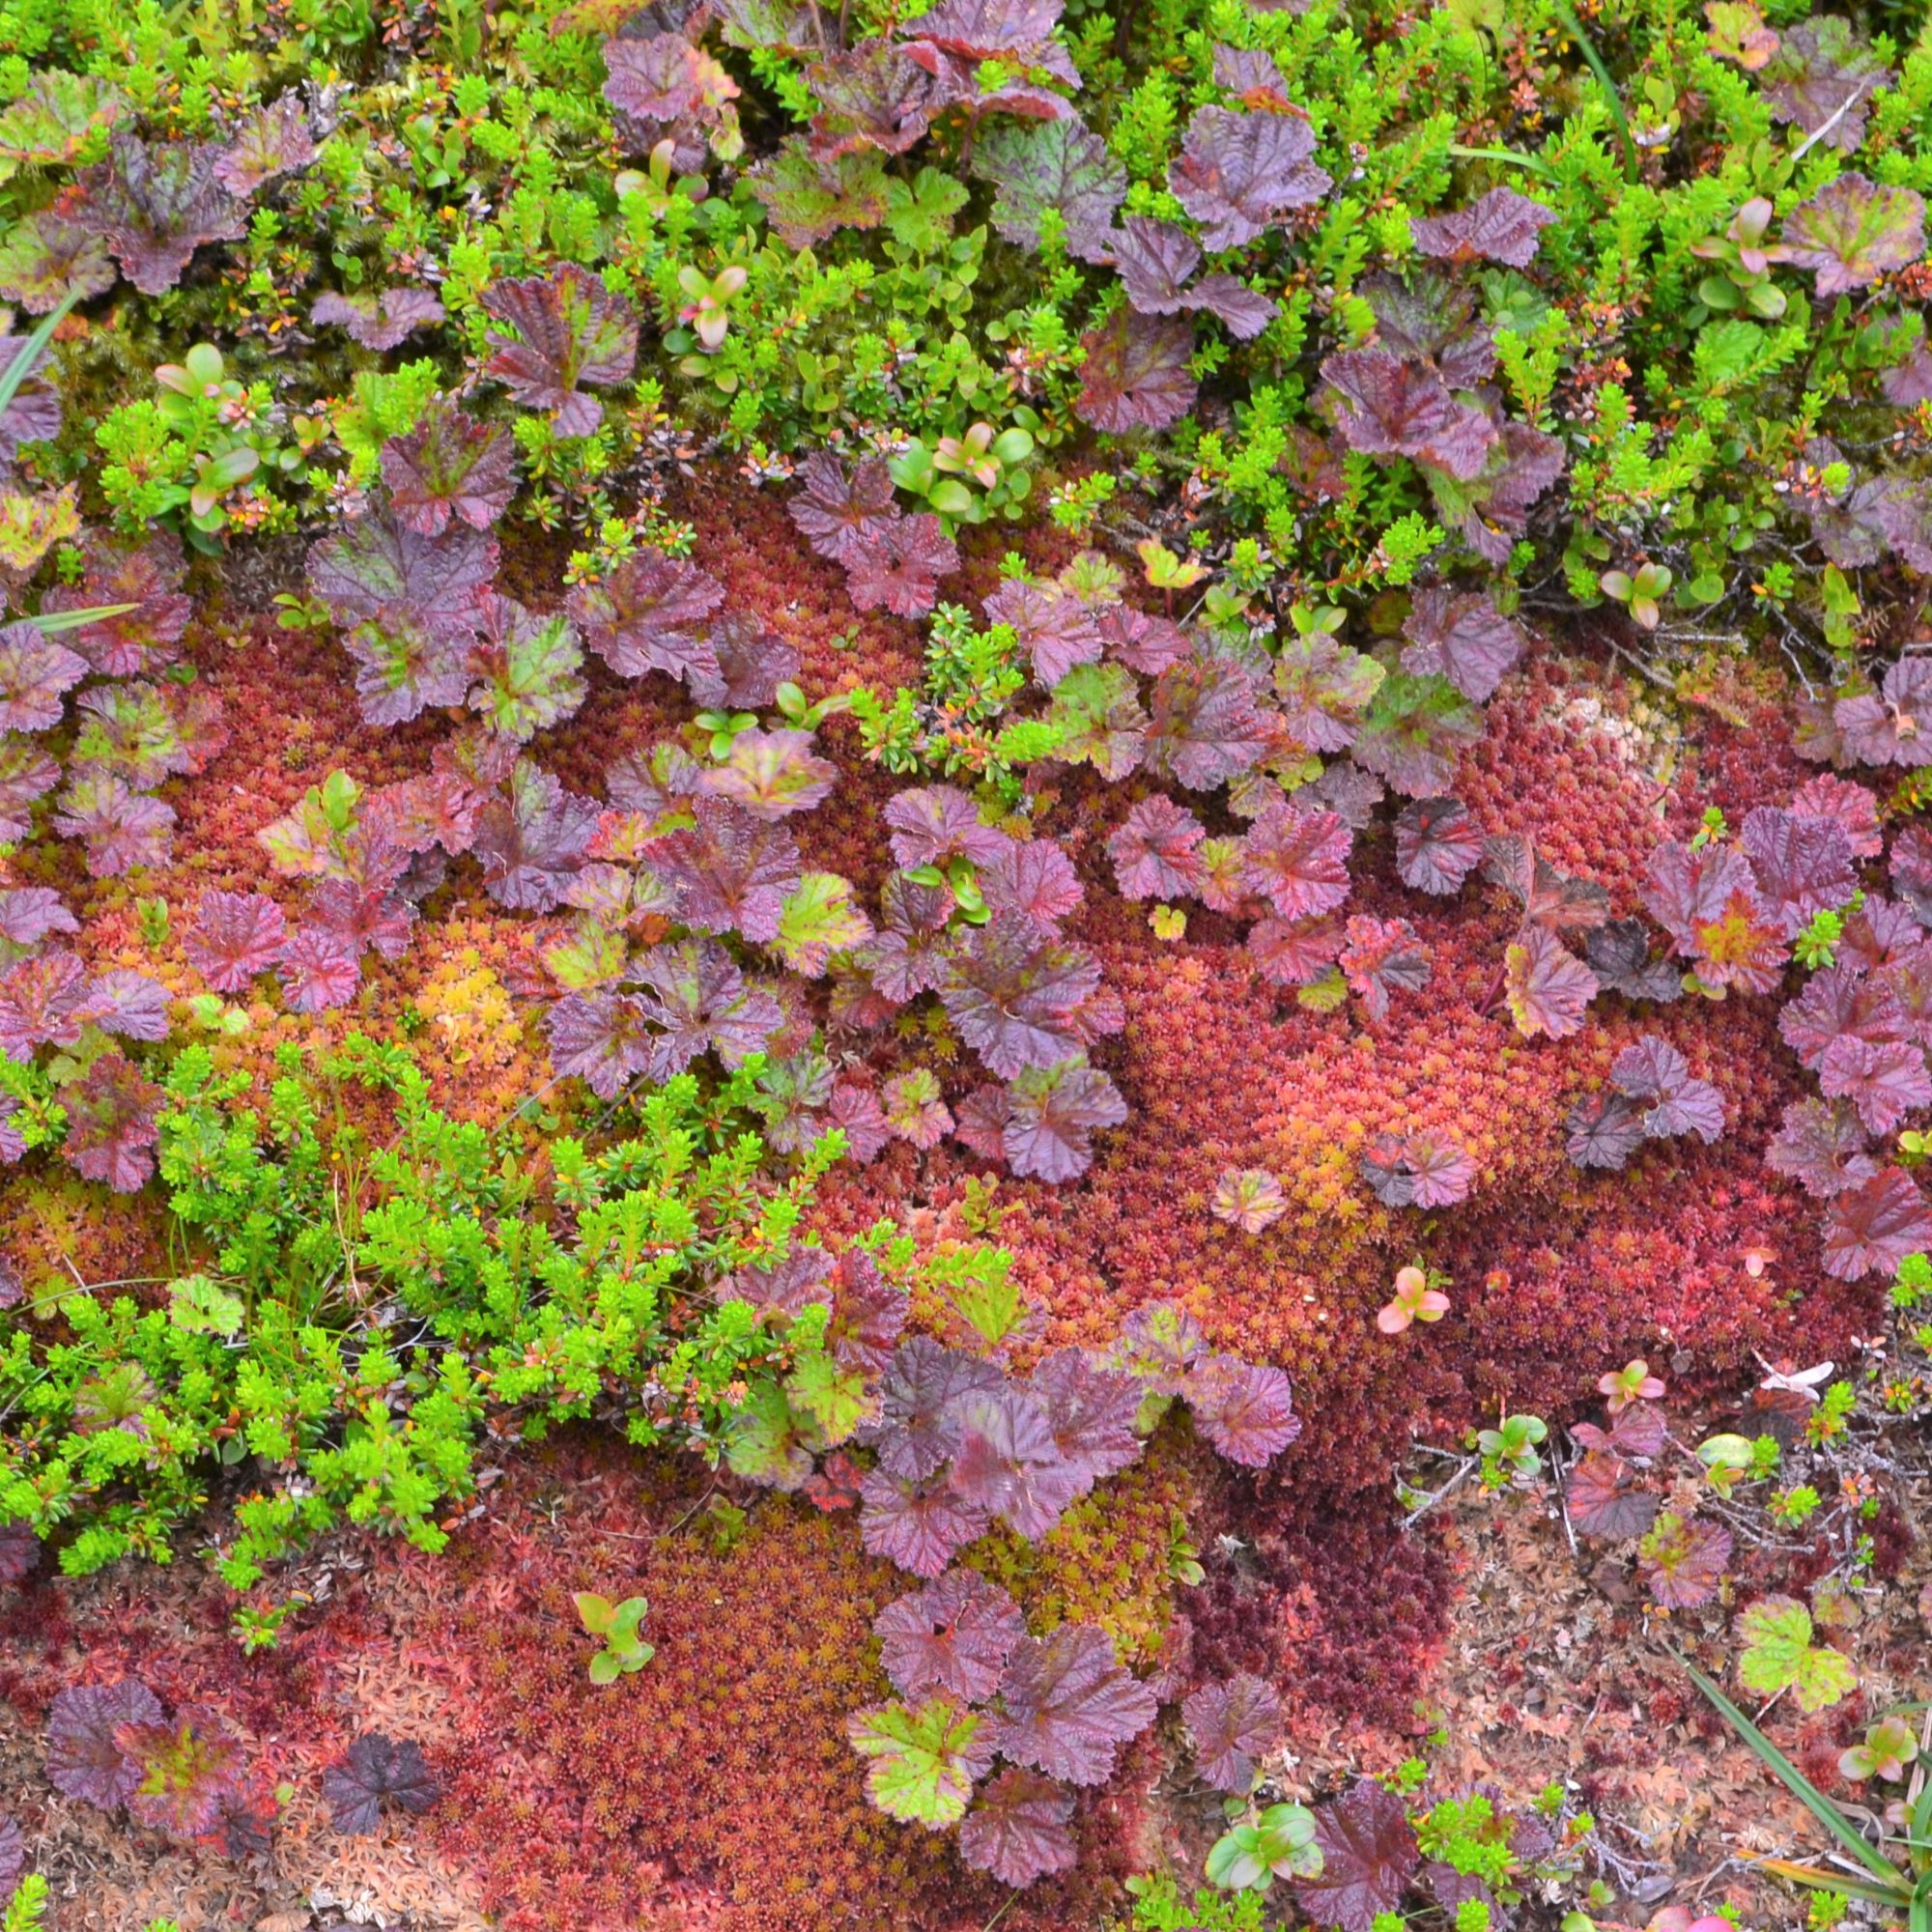 Cloudberry, crowberry and sphagnum moss